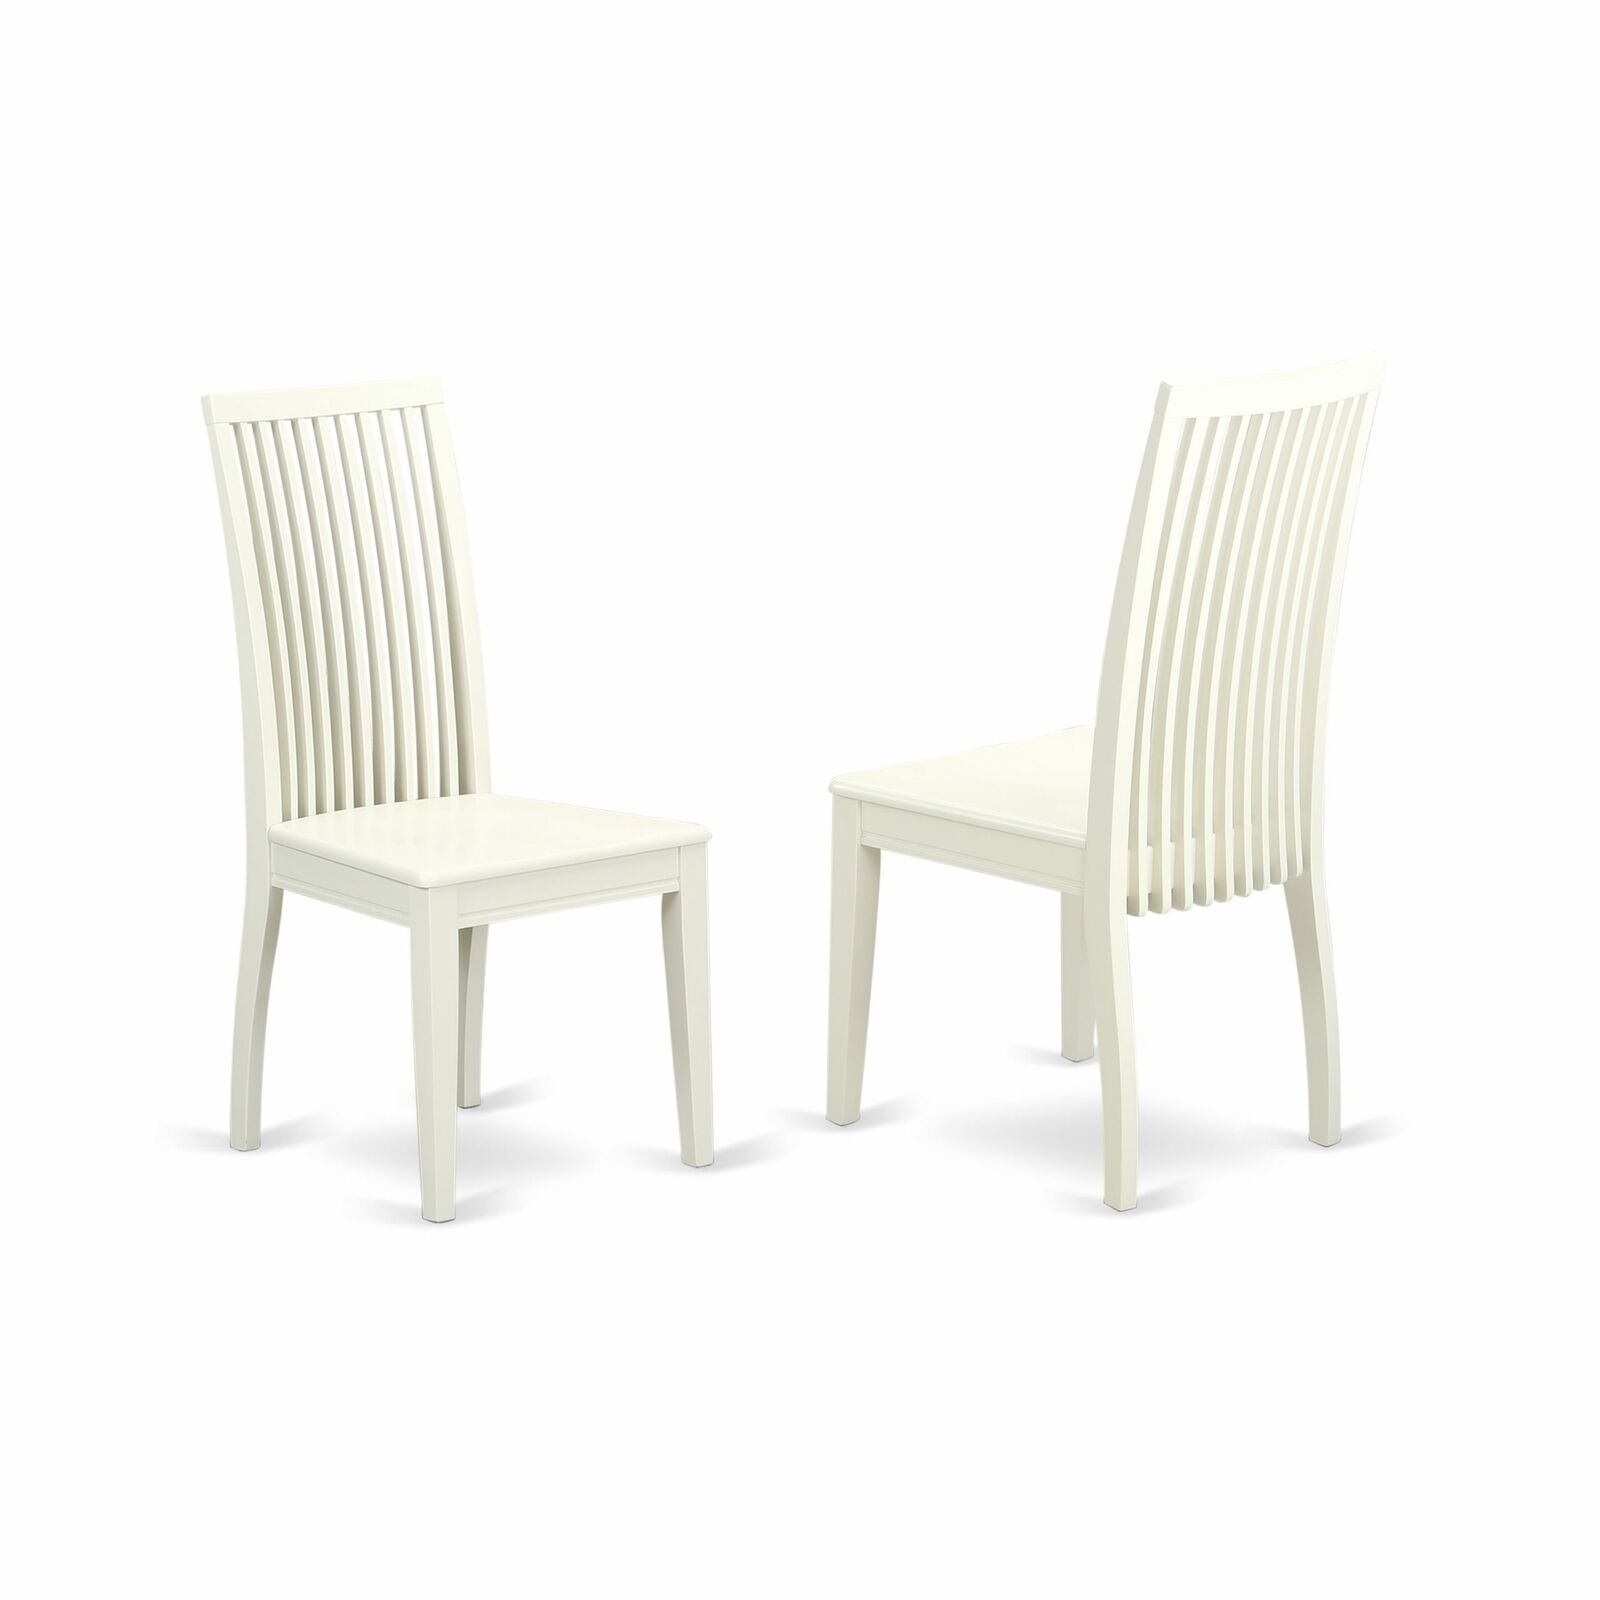 Ipswich Dining Chair With Slatted Back in Linen White Finish